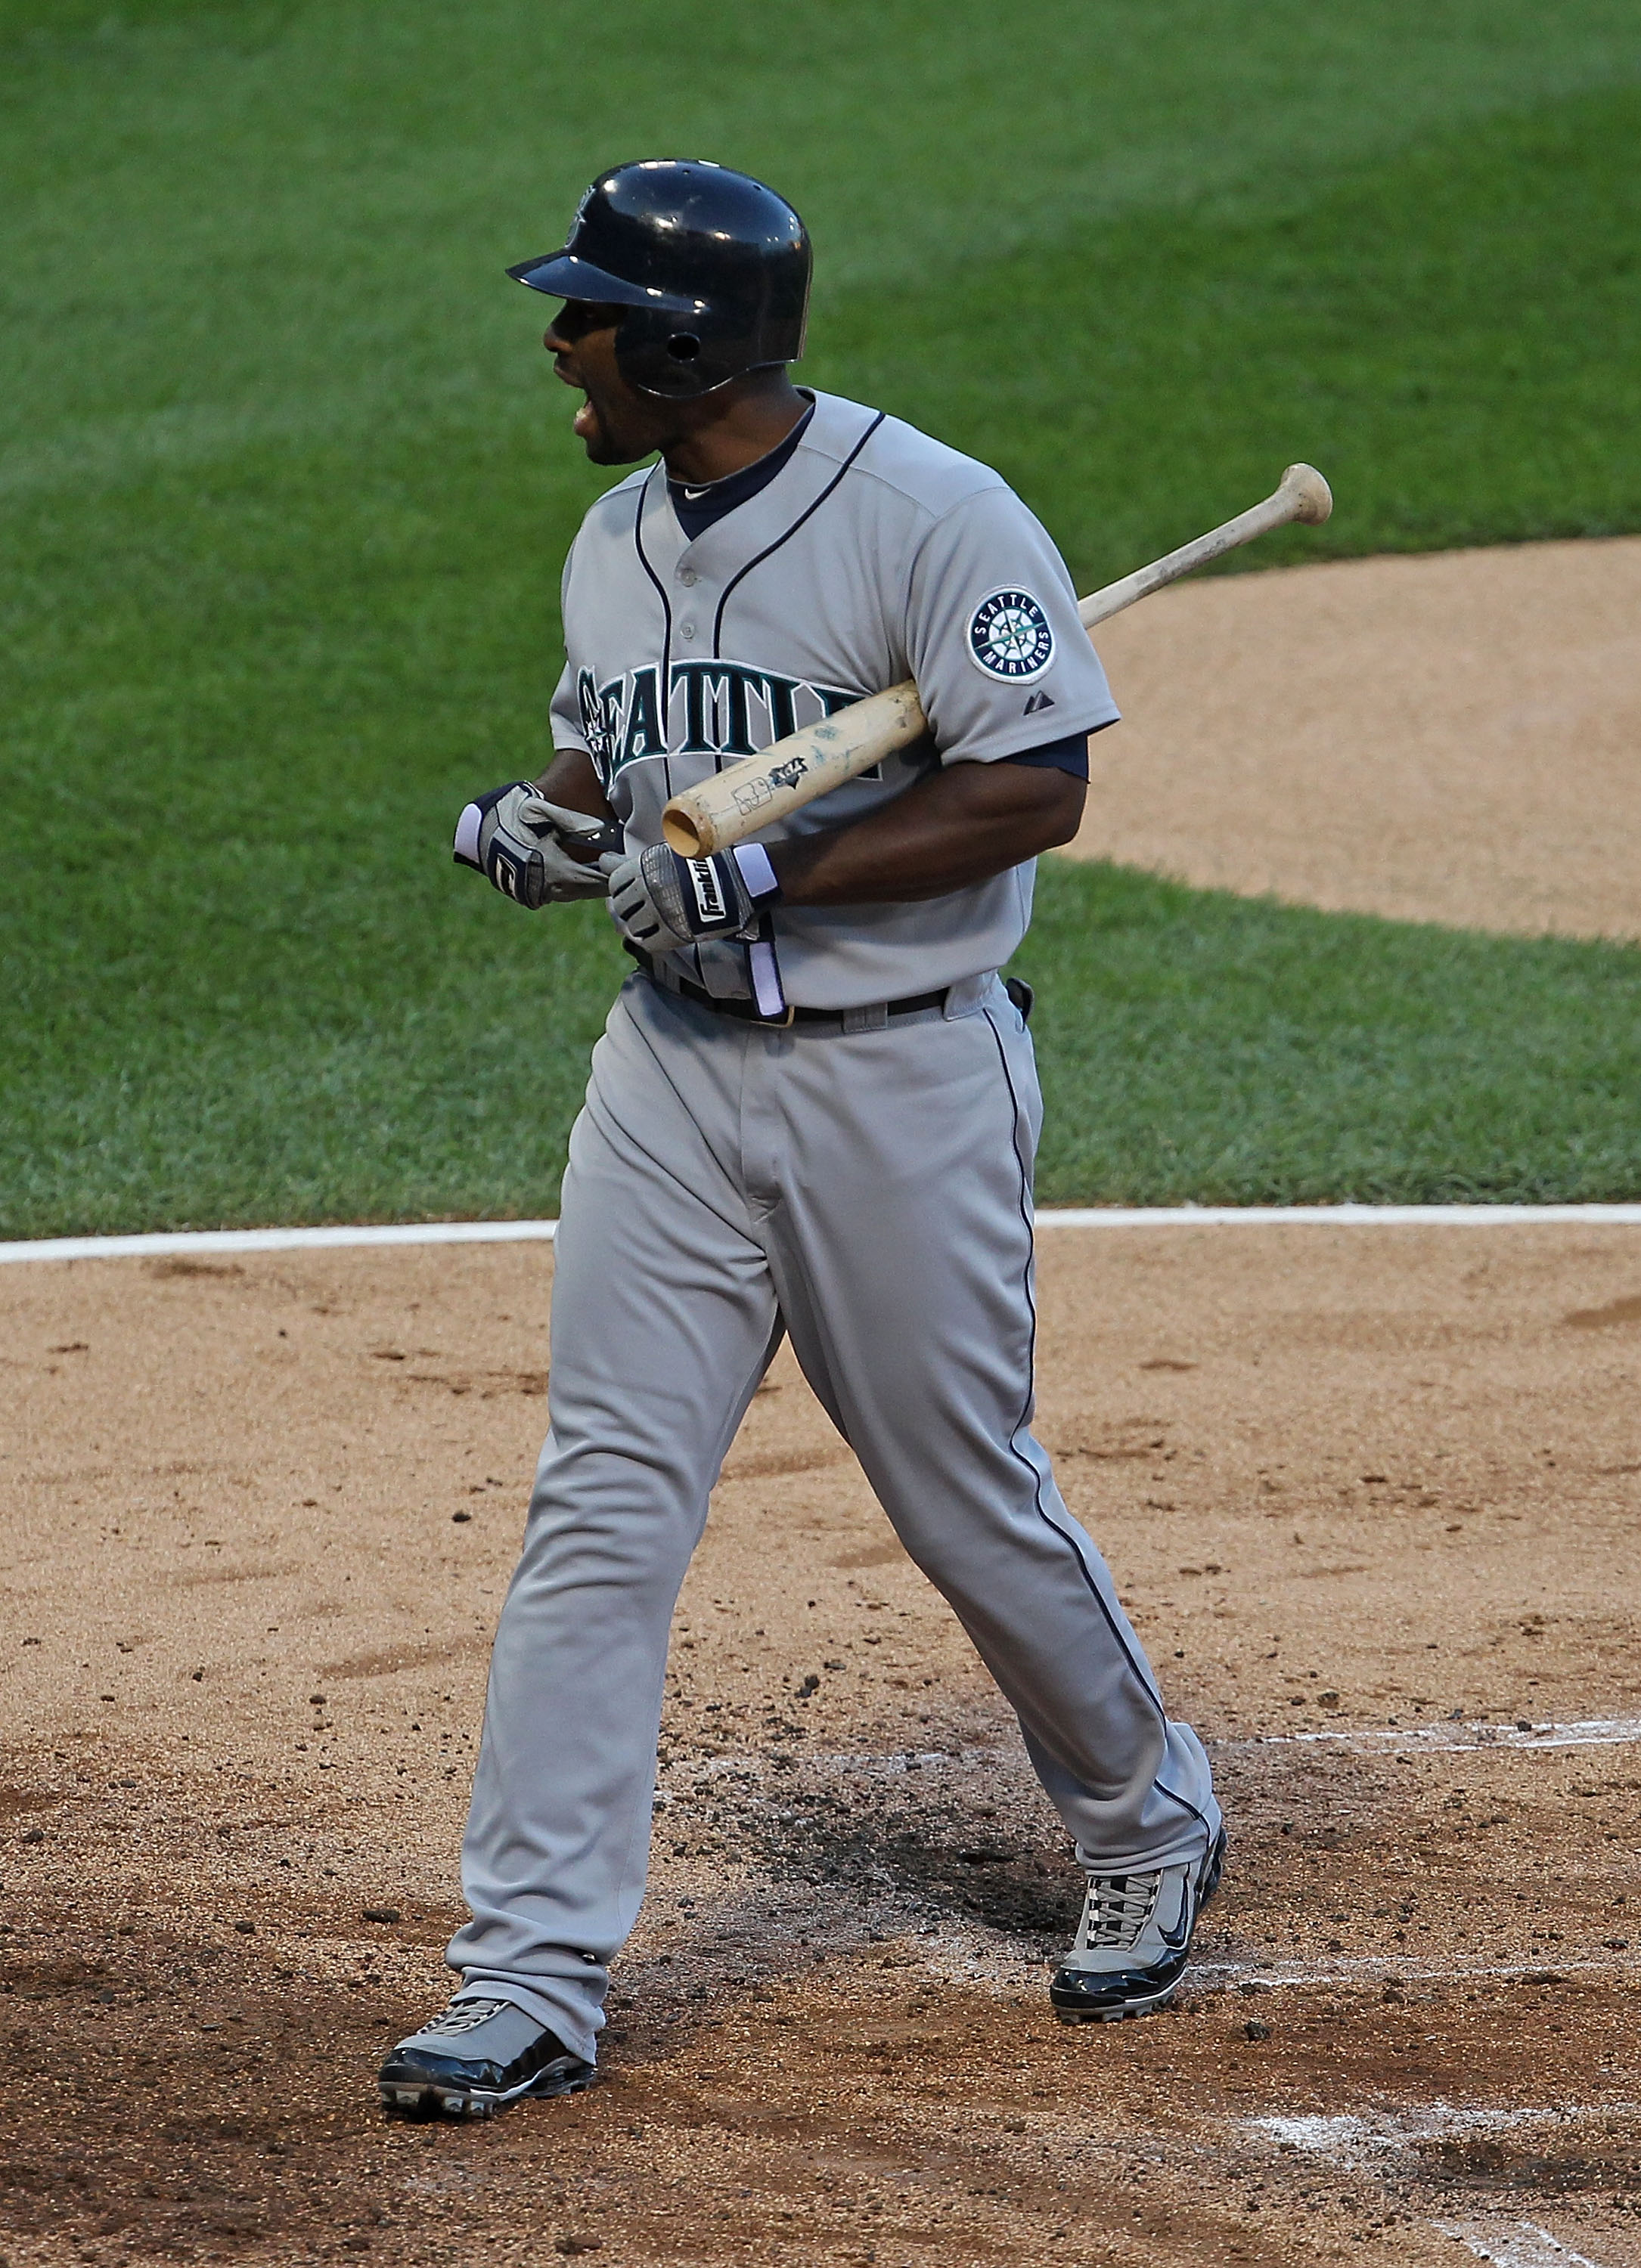 CHICAGO - JULY 26: Milton Bradley #15 of the Seattle Mariners yells at the umpire after being called out on strikes against the Chicago White Sox at U.S. Cellular Field on July 26, 2010 in Chicago, Illinois. (Photo by Jonathan Daniel/Getty Images)